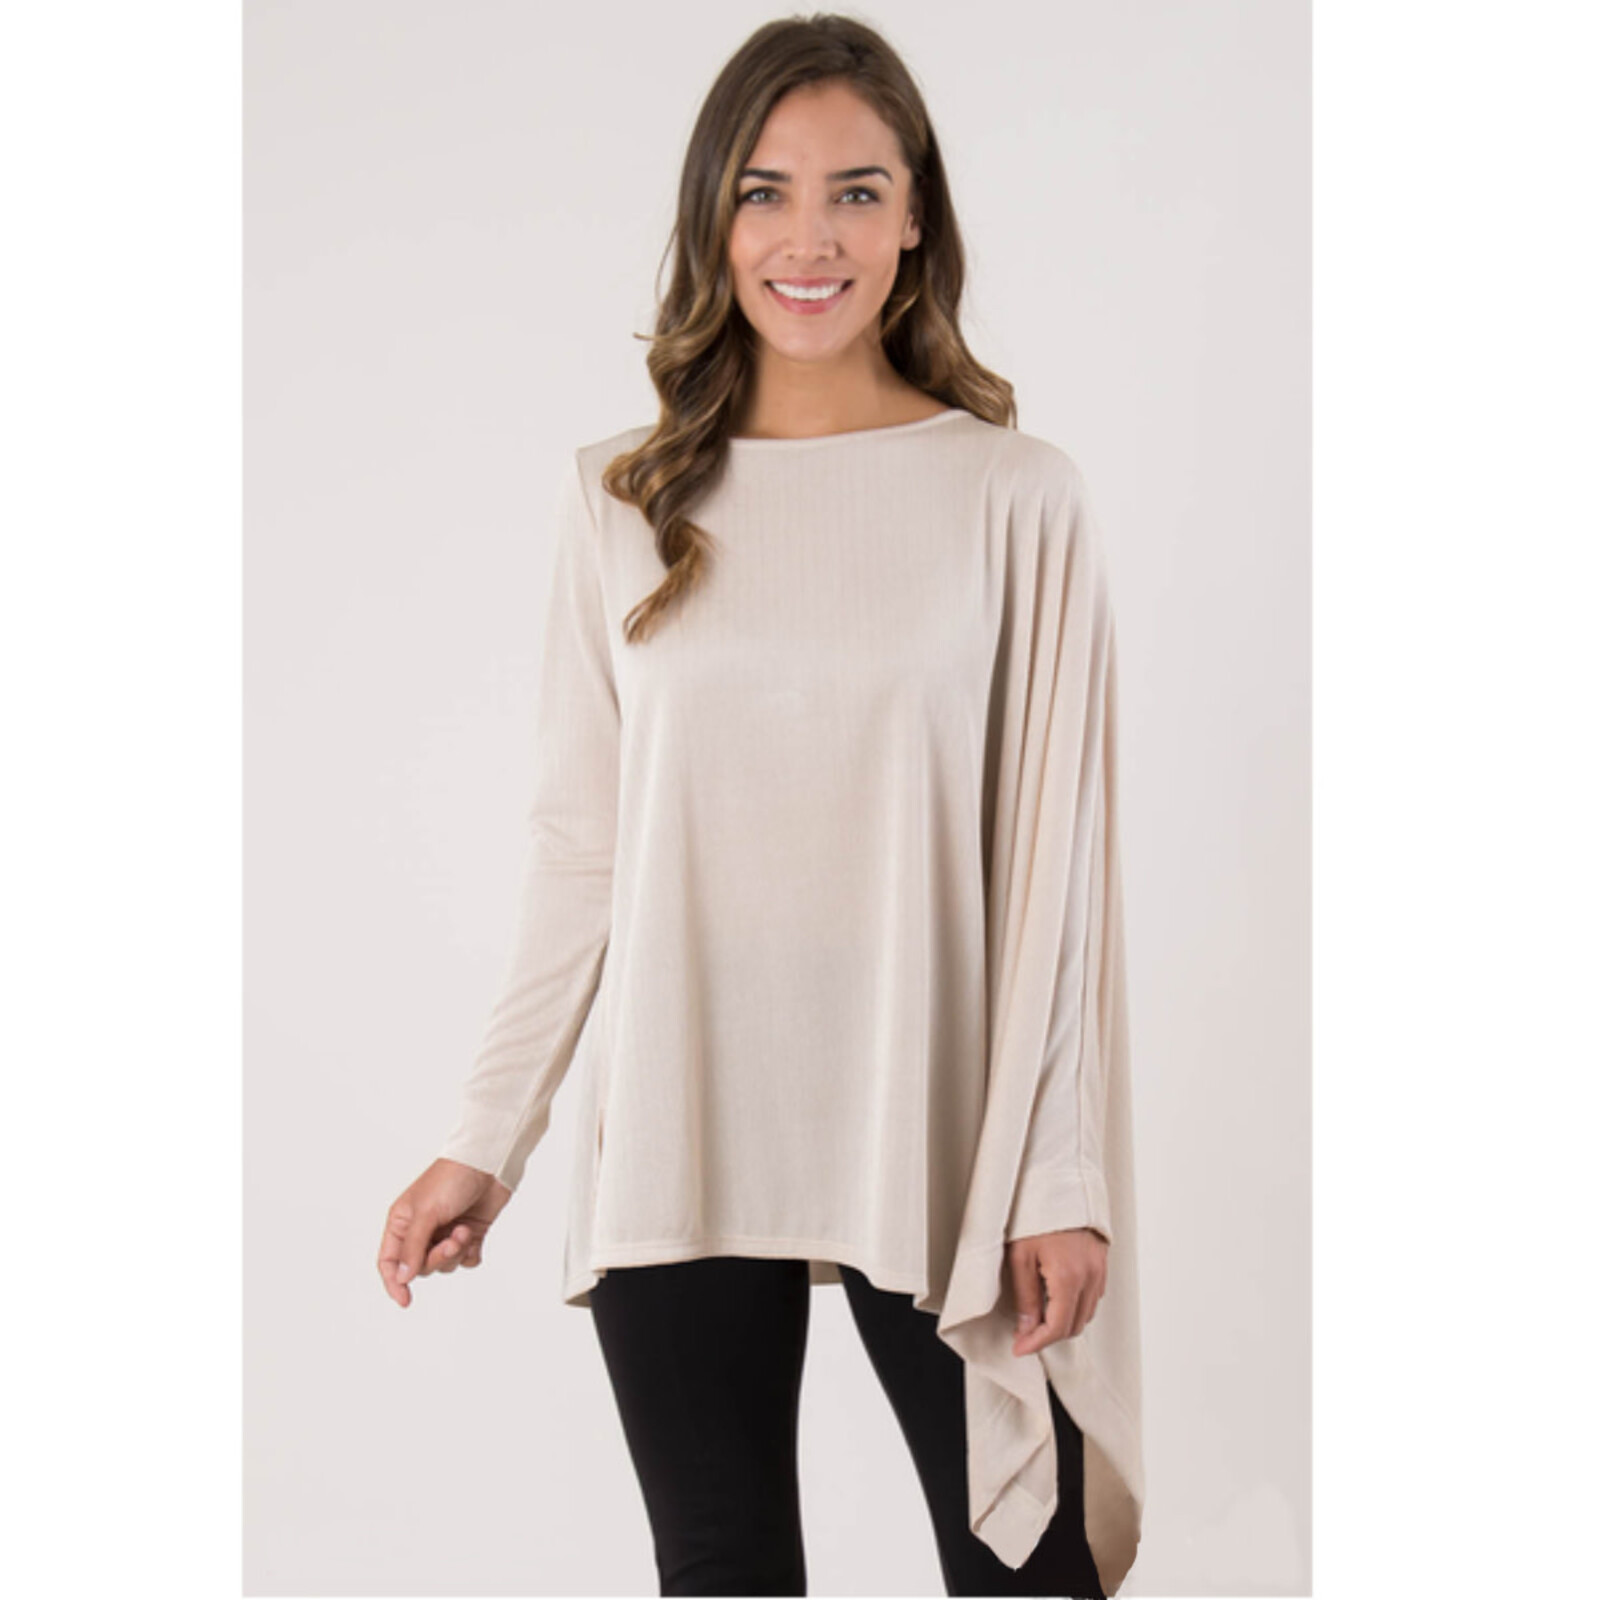 Simply Noelle Cape Sleeve Top - S/M     TOP8001SM loading=